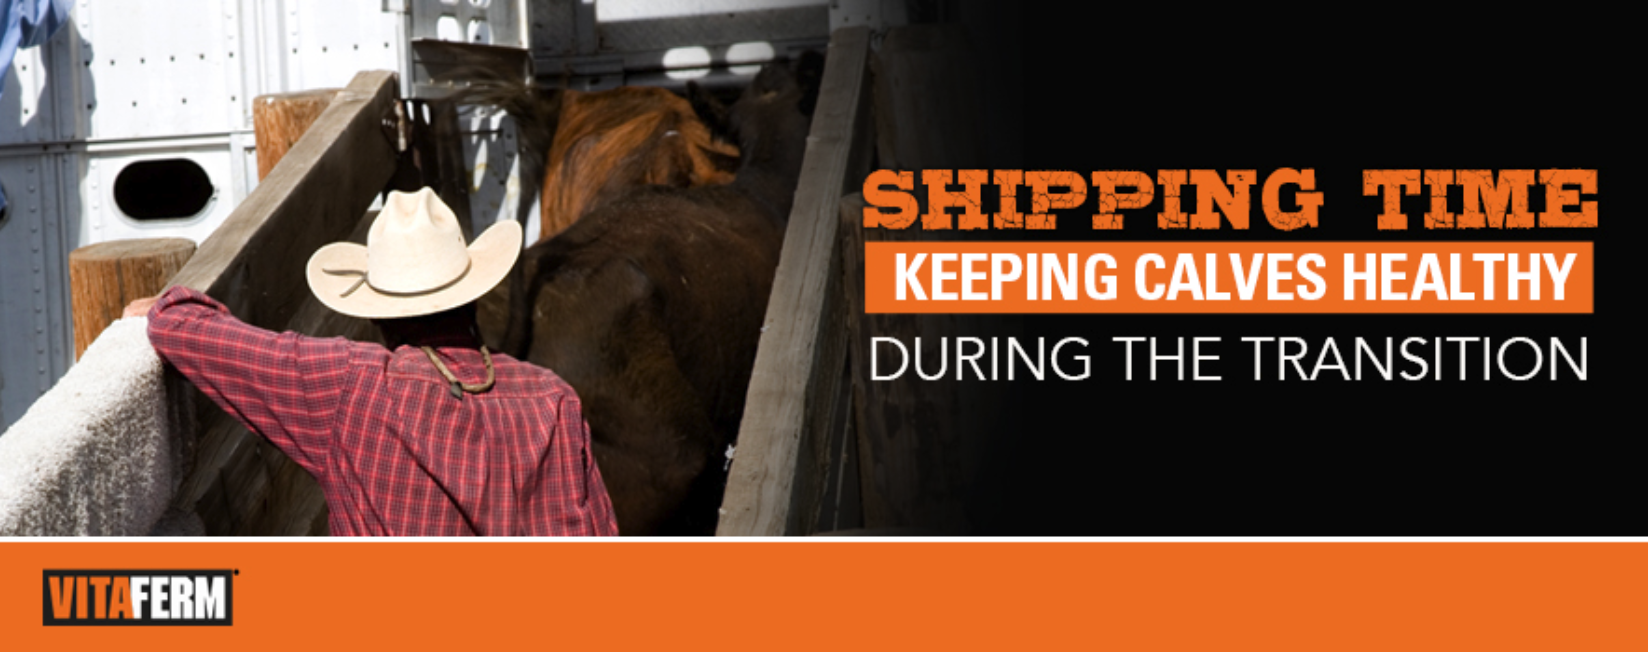 It’s Shipping Time: Keep Calves Healthy During the Transition